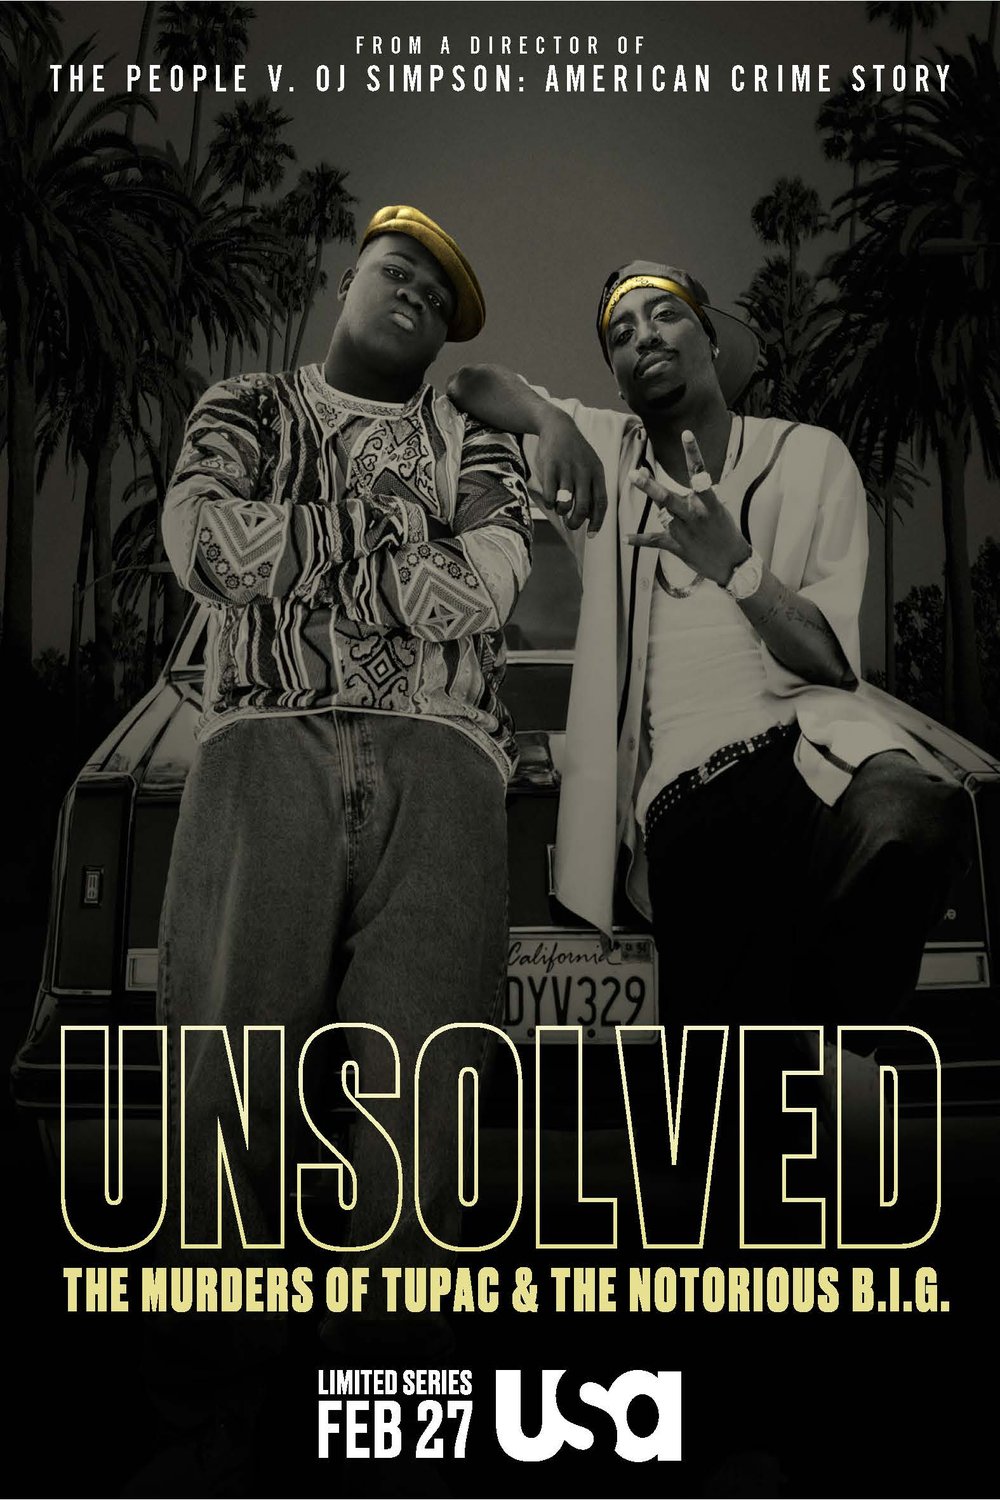 Poster of the movie Unsolved